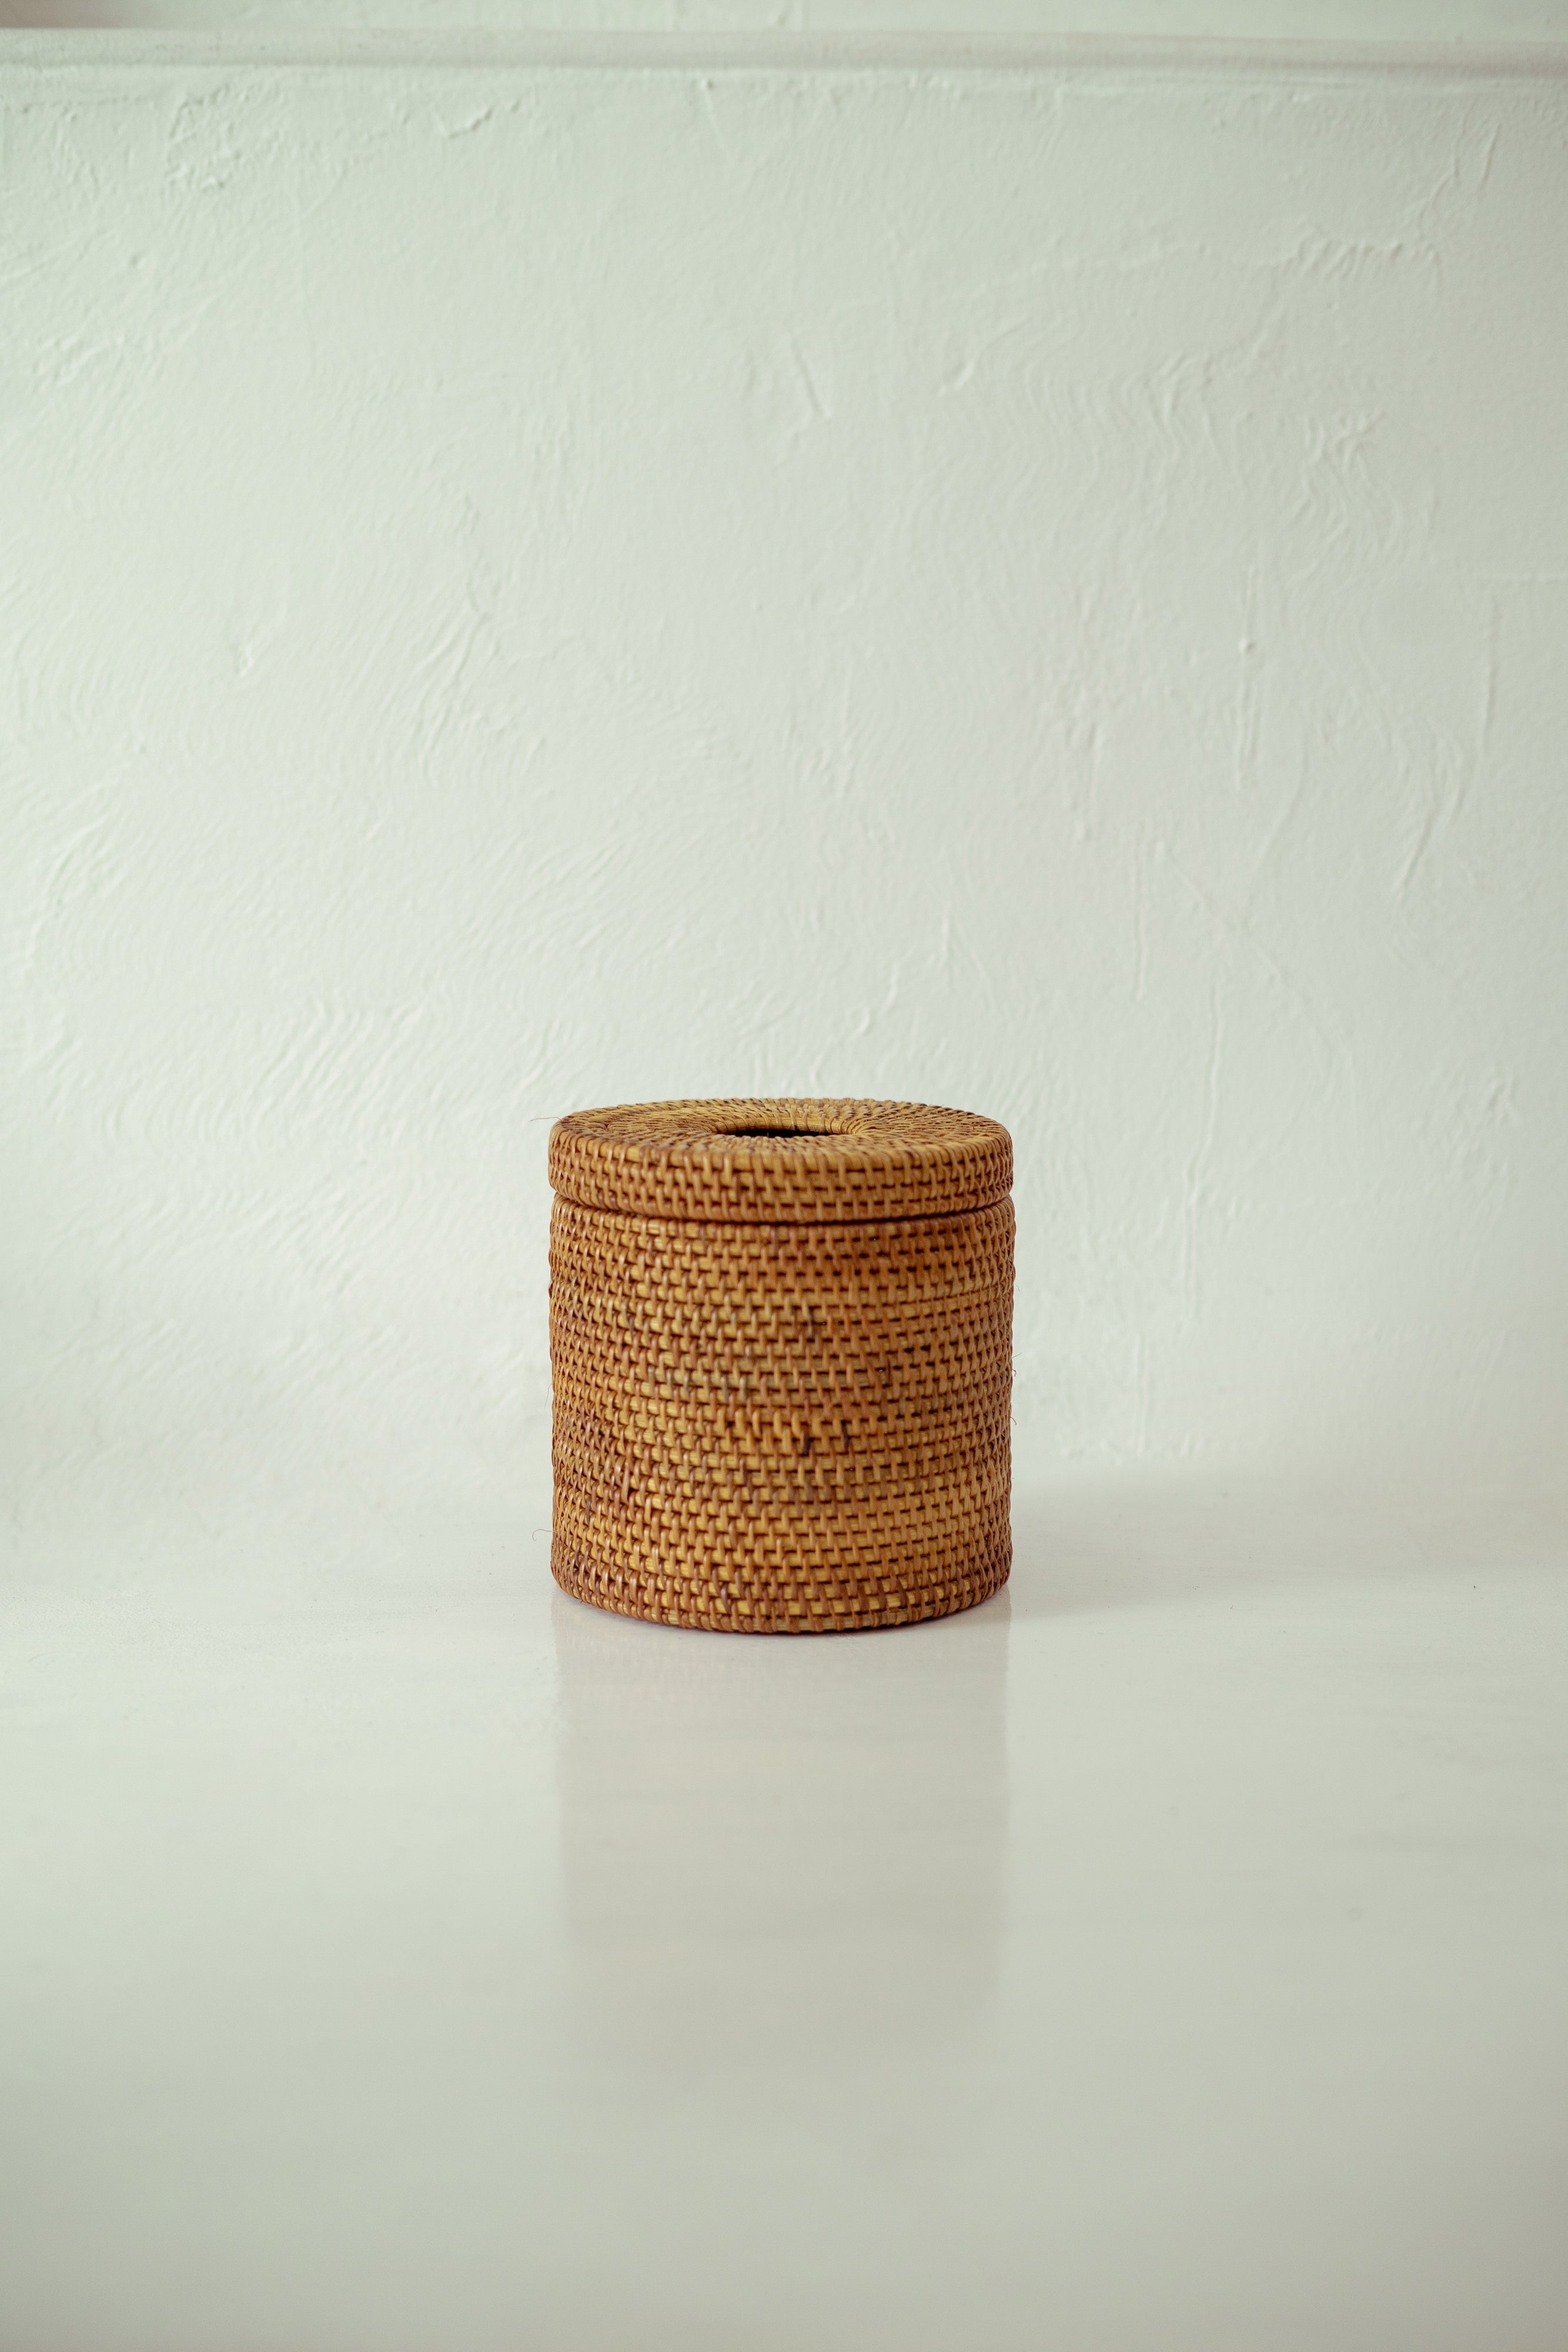 Yotto Home - Indah rattan toilet roll holder  - Yotto Home -  furniture , home and living , living room , bedroom , homes , home products , made in indonesia , local brand , singapore brand , wood , teak wood , rattan , night stand , drawer , baskets , bowls , laundry baskets , laundry room , dining room , serveware , kitchenware , decor , home decor , coasters , bowls , rooms , kitchen , bathroom , garden & balcony , stools 